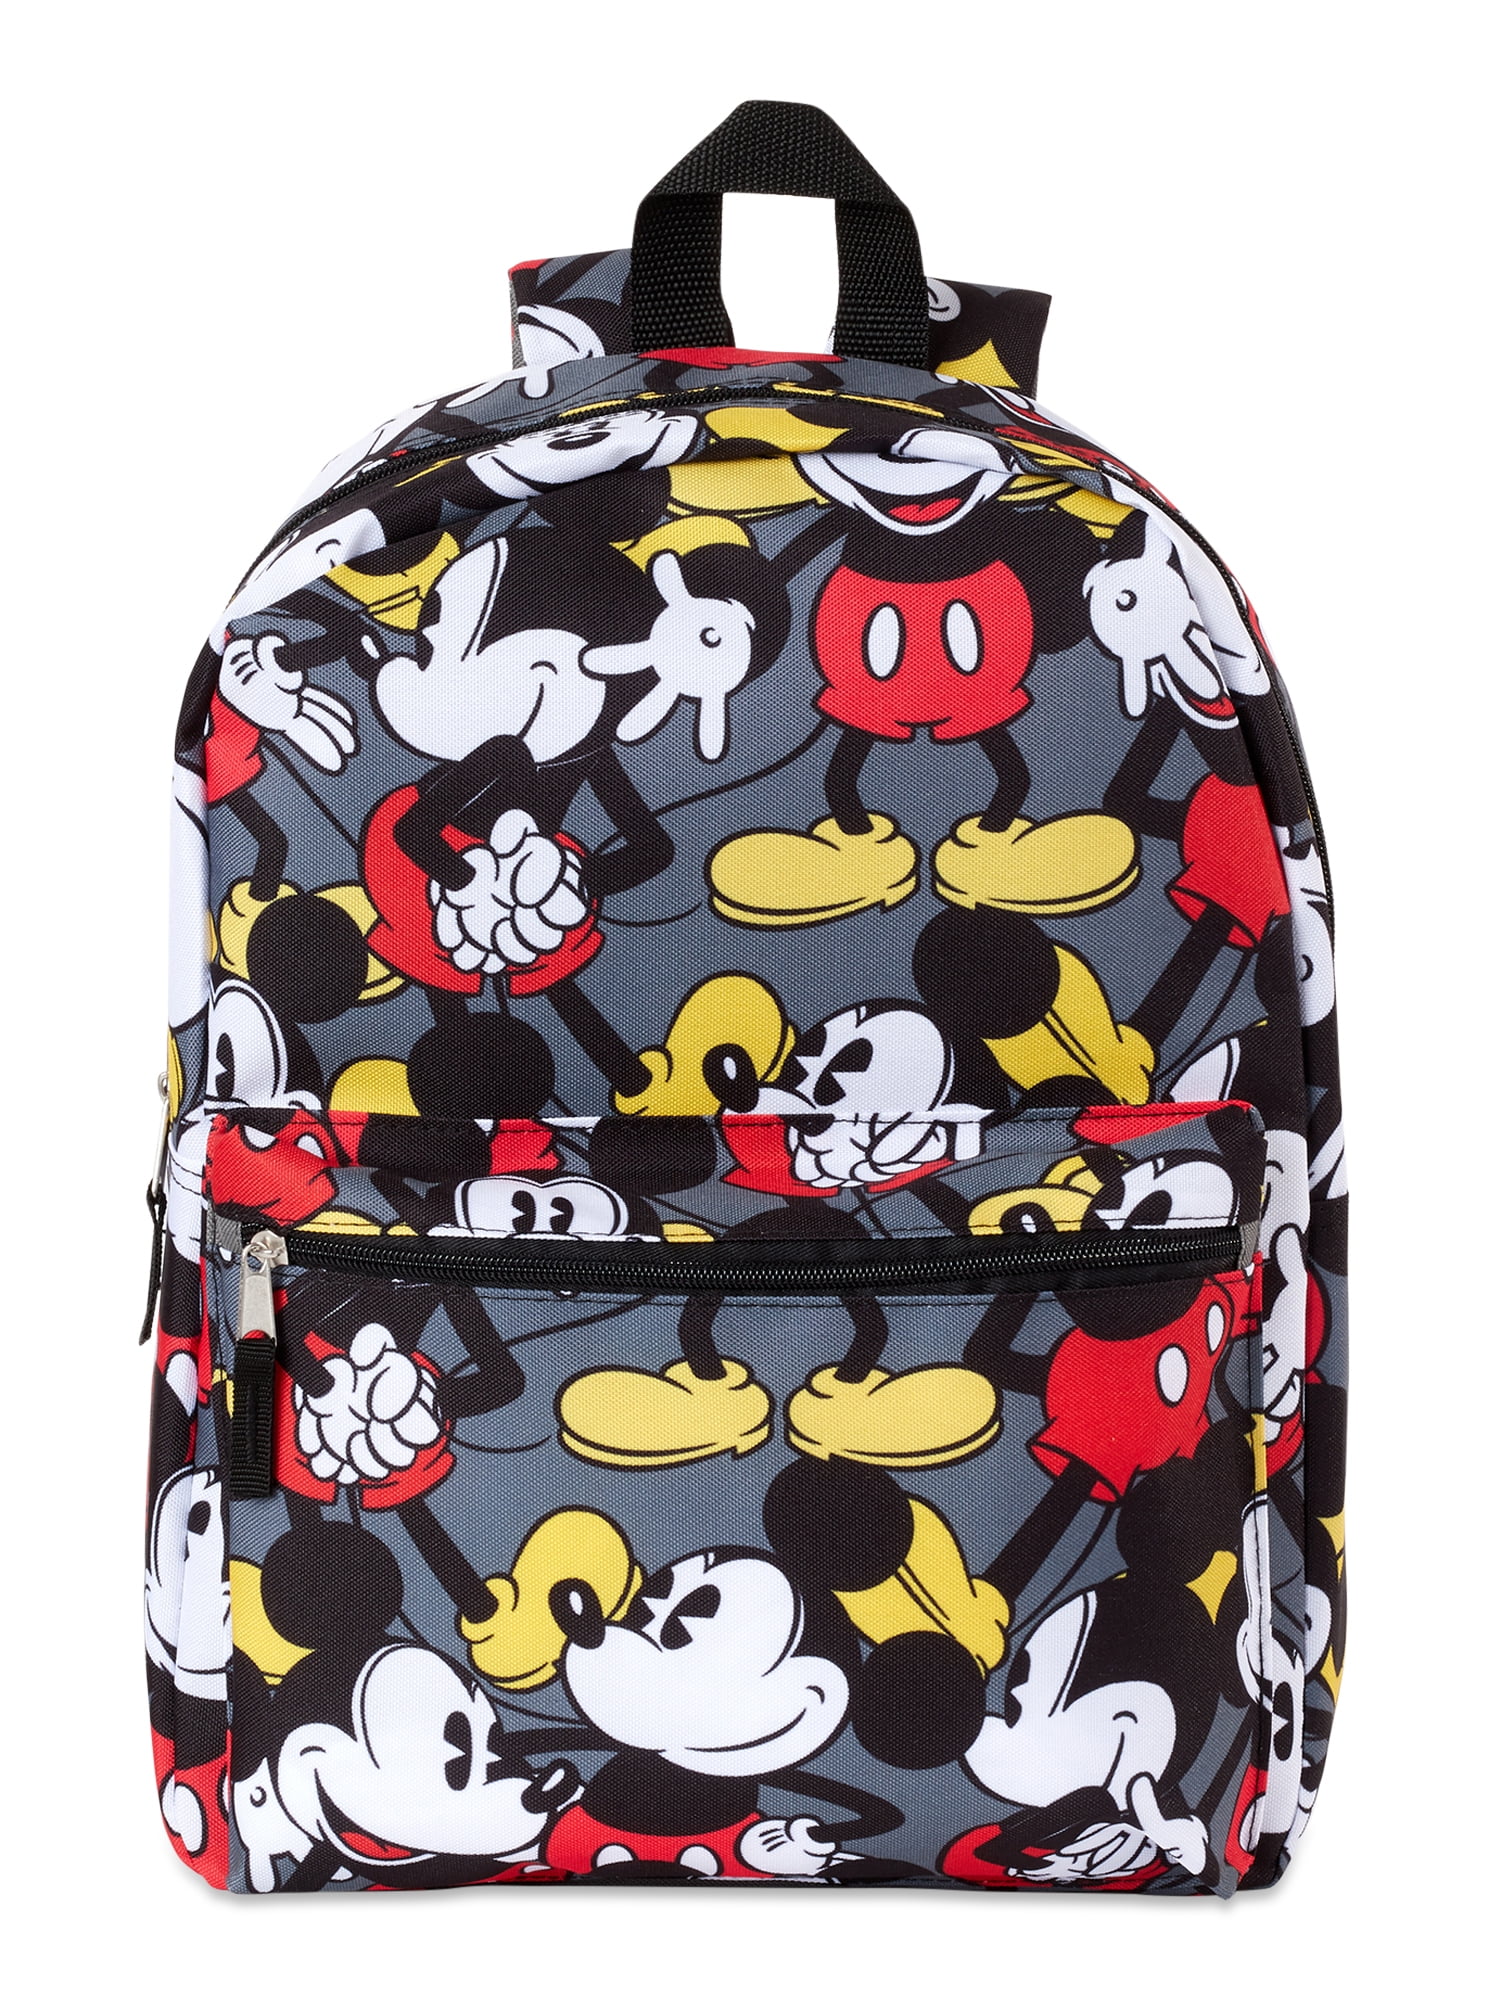 Disney Mickey Mouse Backpack for Women